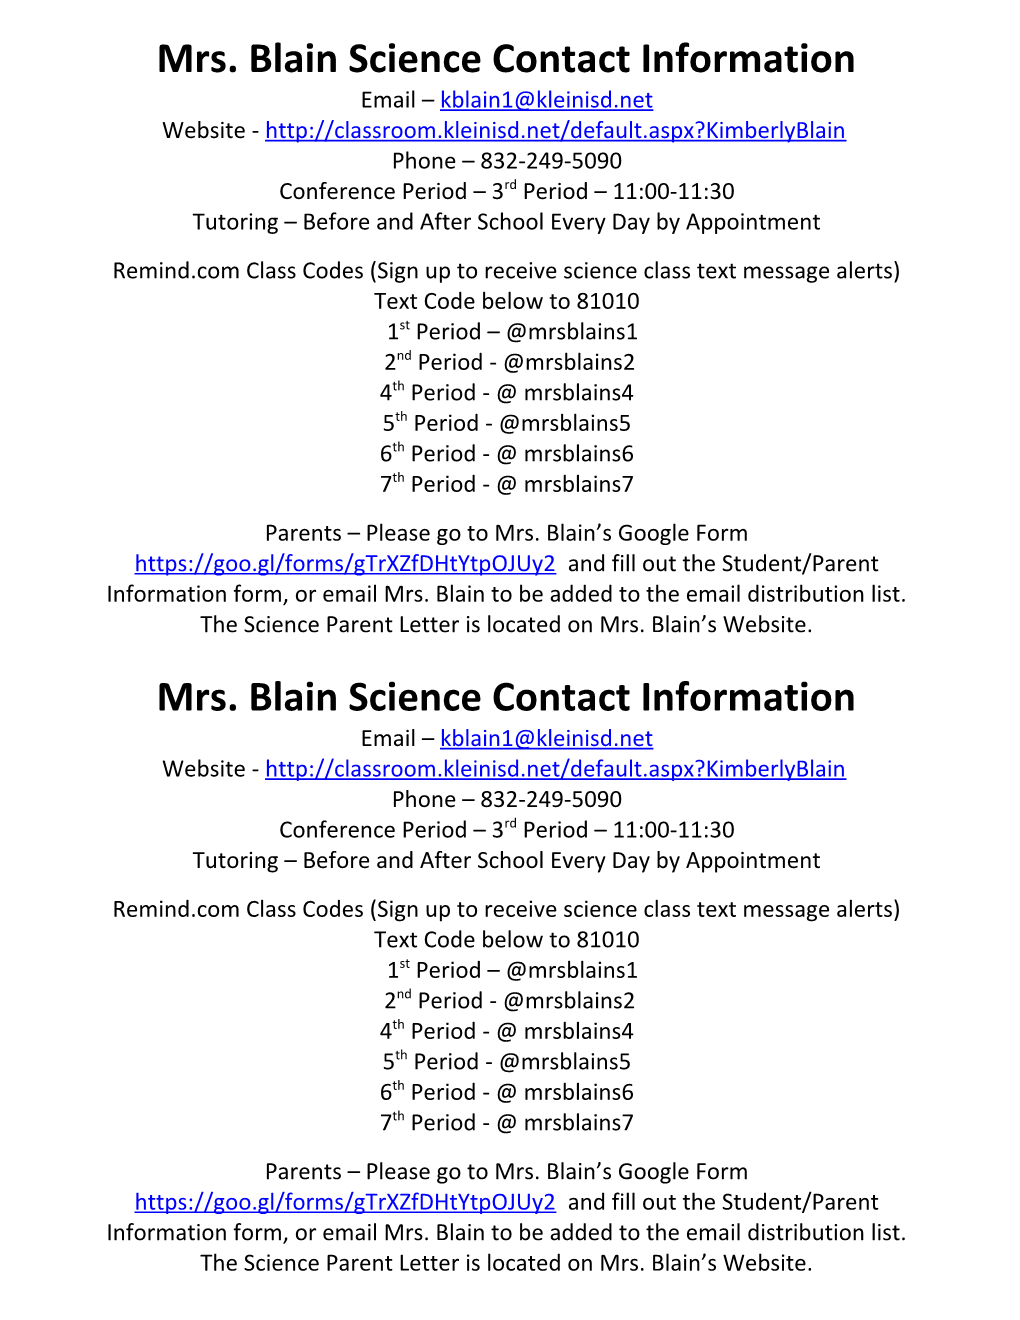 Mrs. Blain Science Contact Information